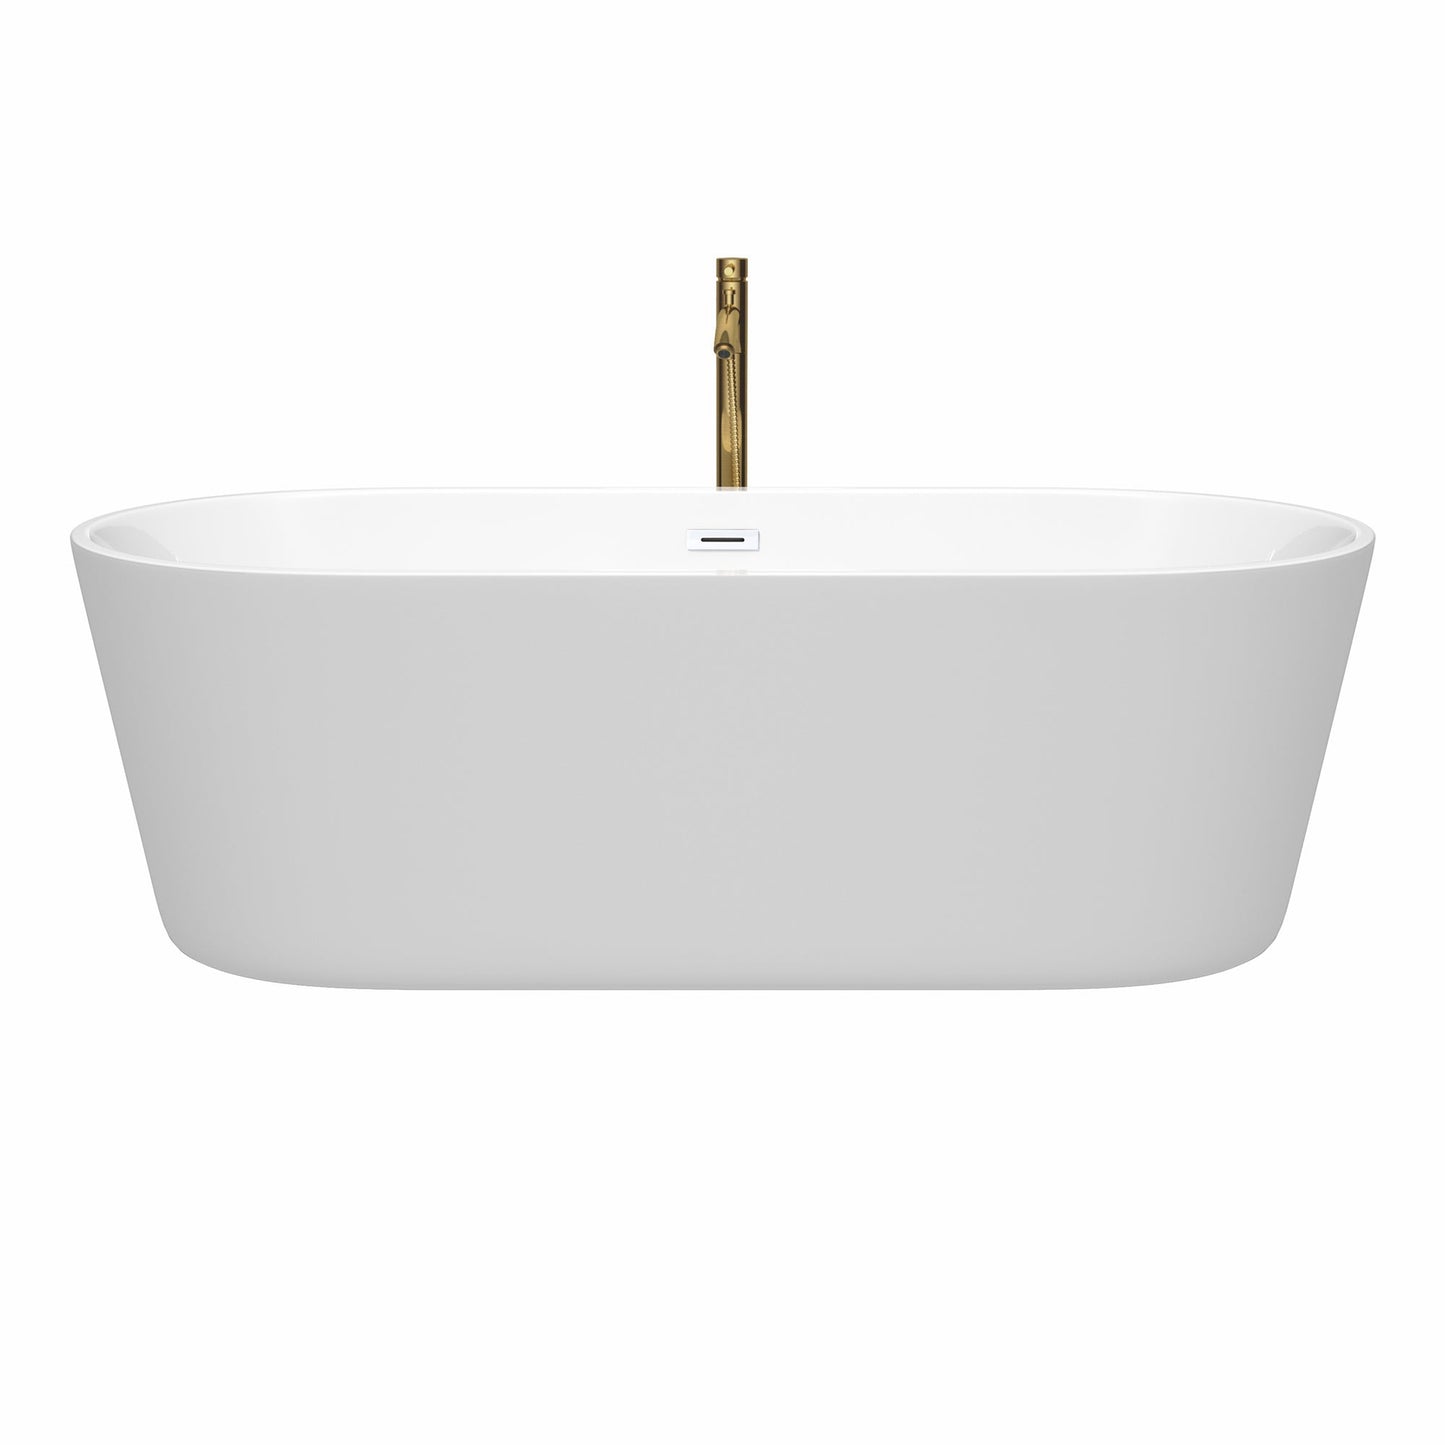 Wyndham Collection Carissa 71" Freestanding Bathtub in White With Shiny White Trim and Floor Mounted Faucet in Brushed Gold